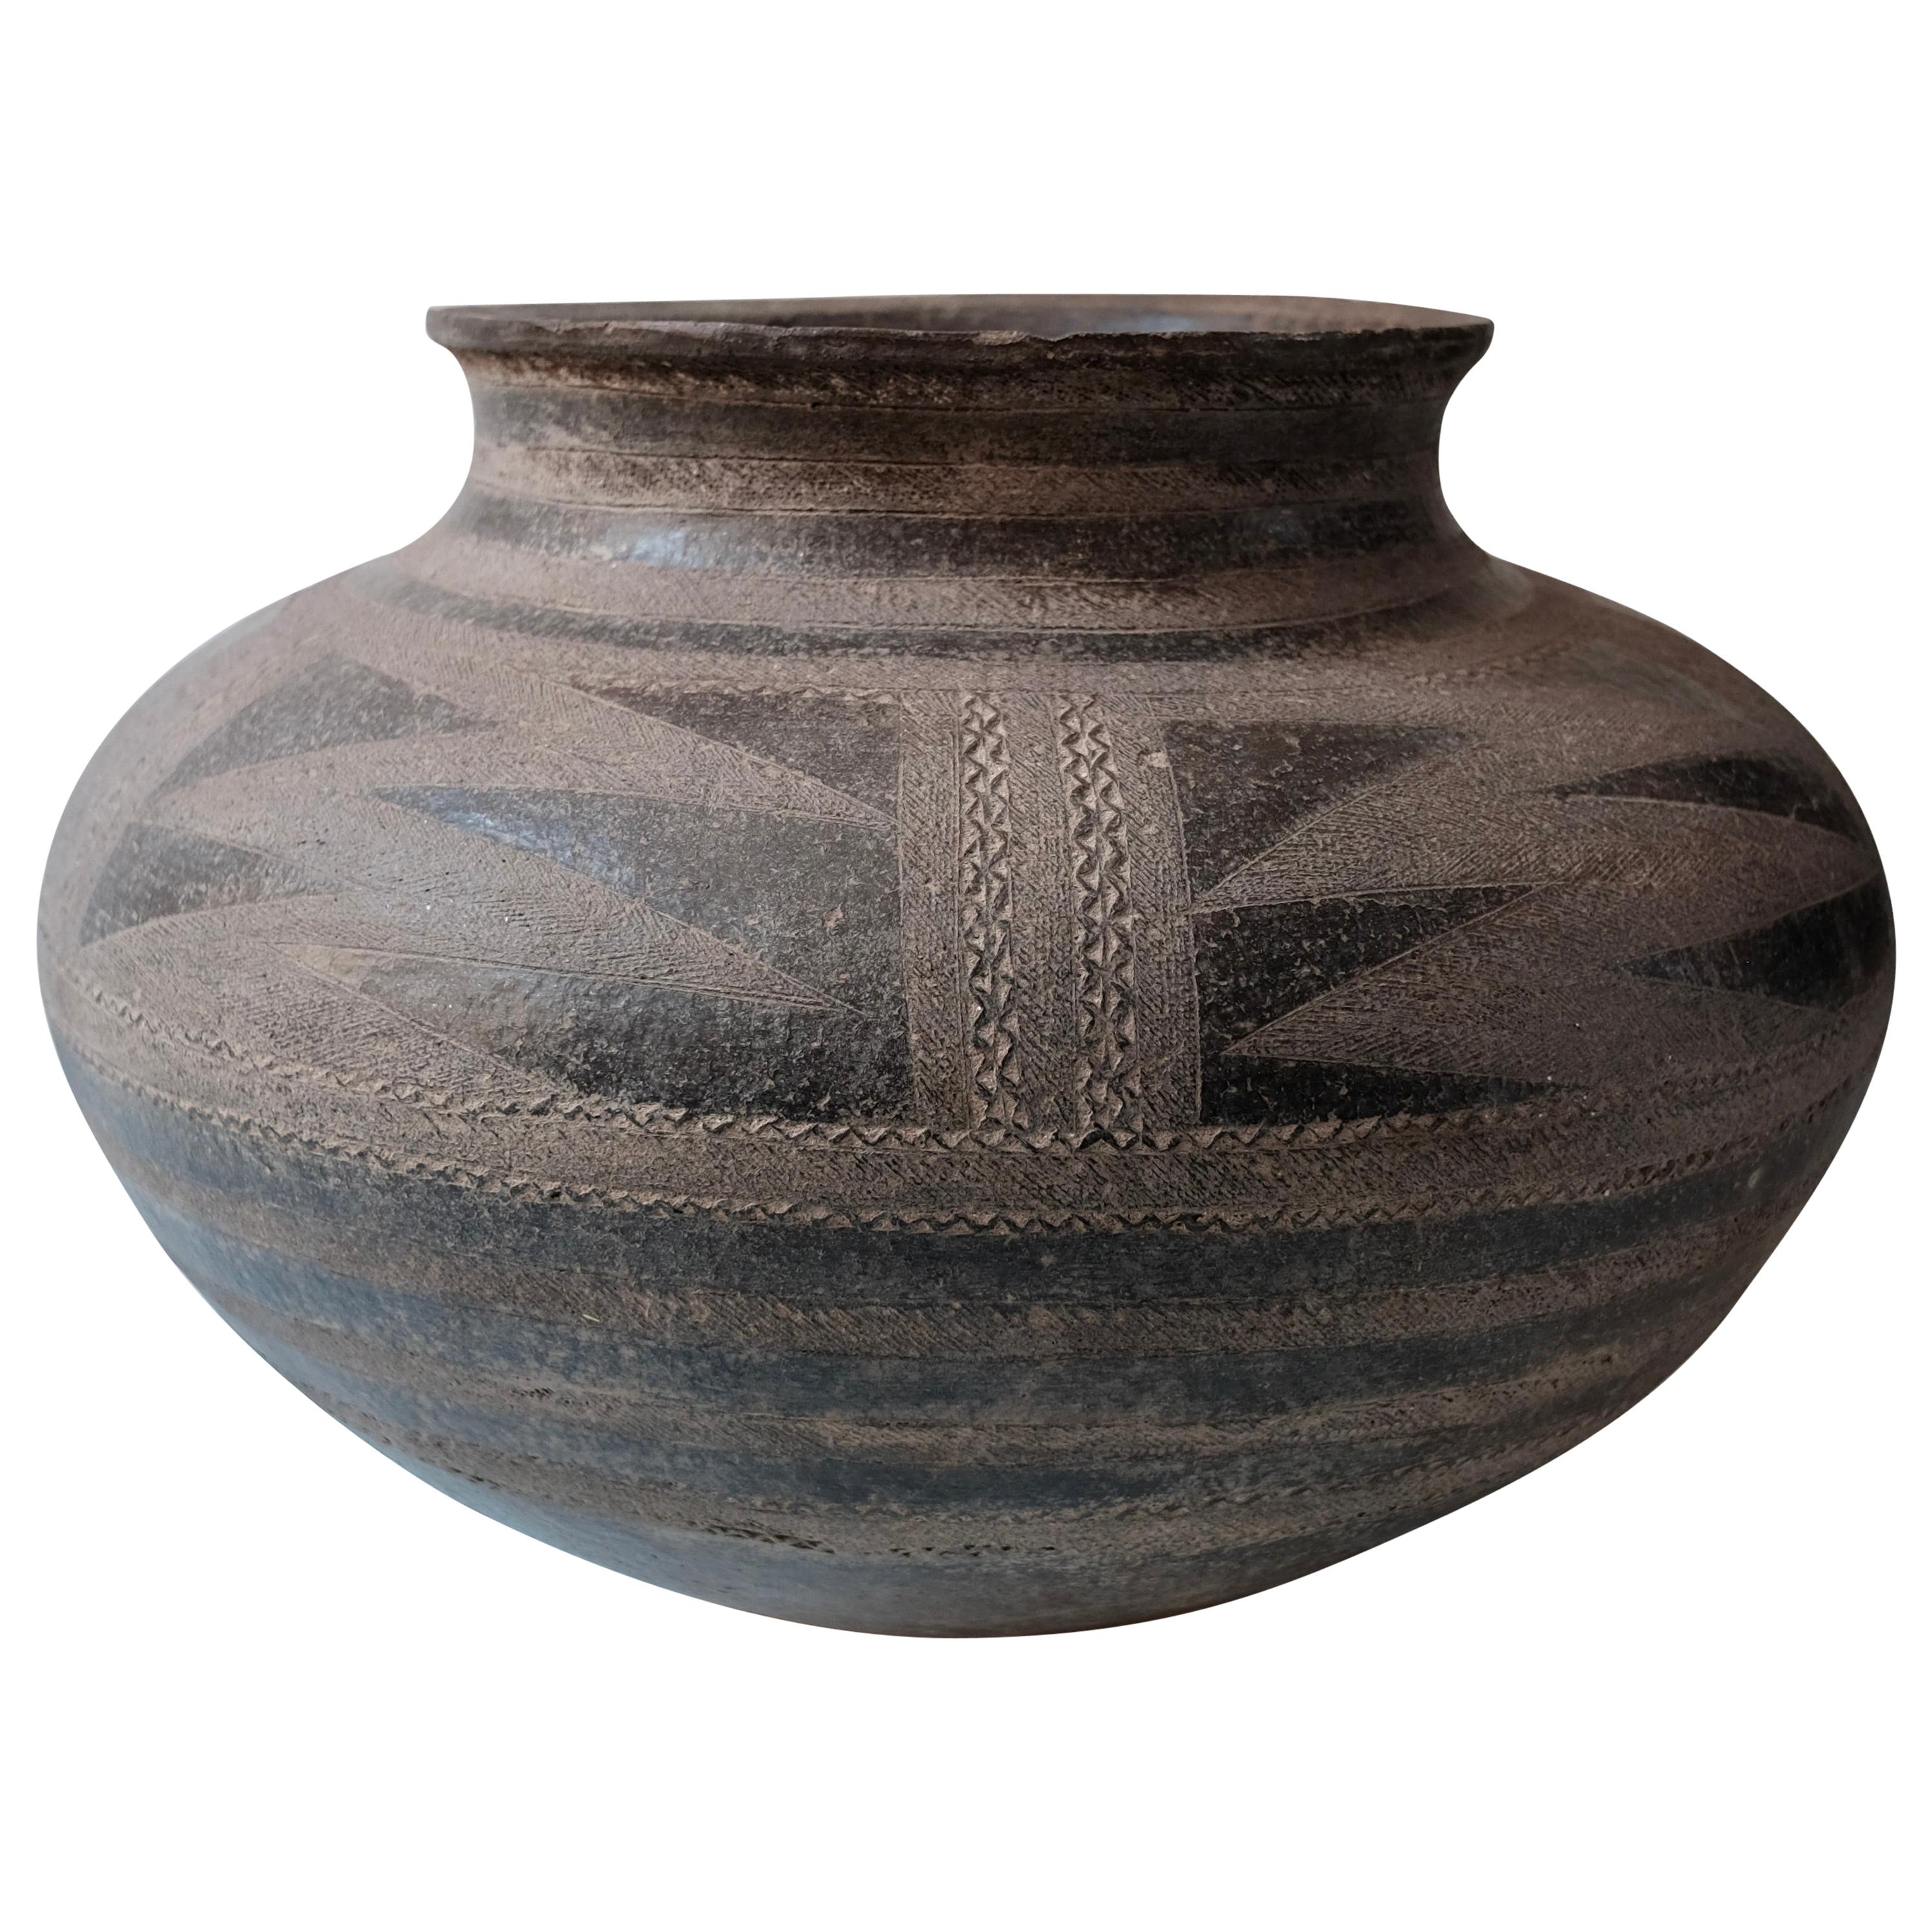 Maconde Water Pot from Mozambique, Africa